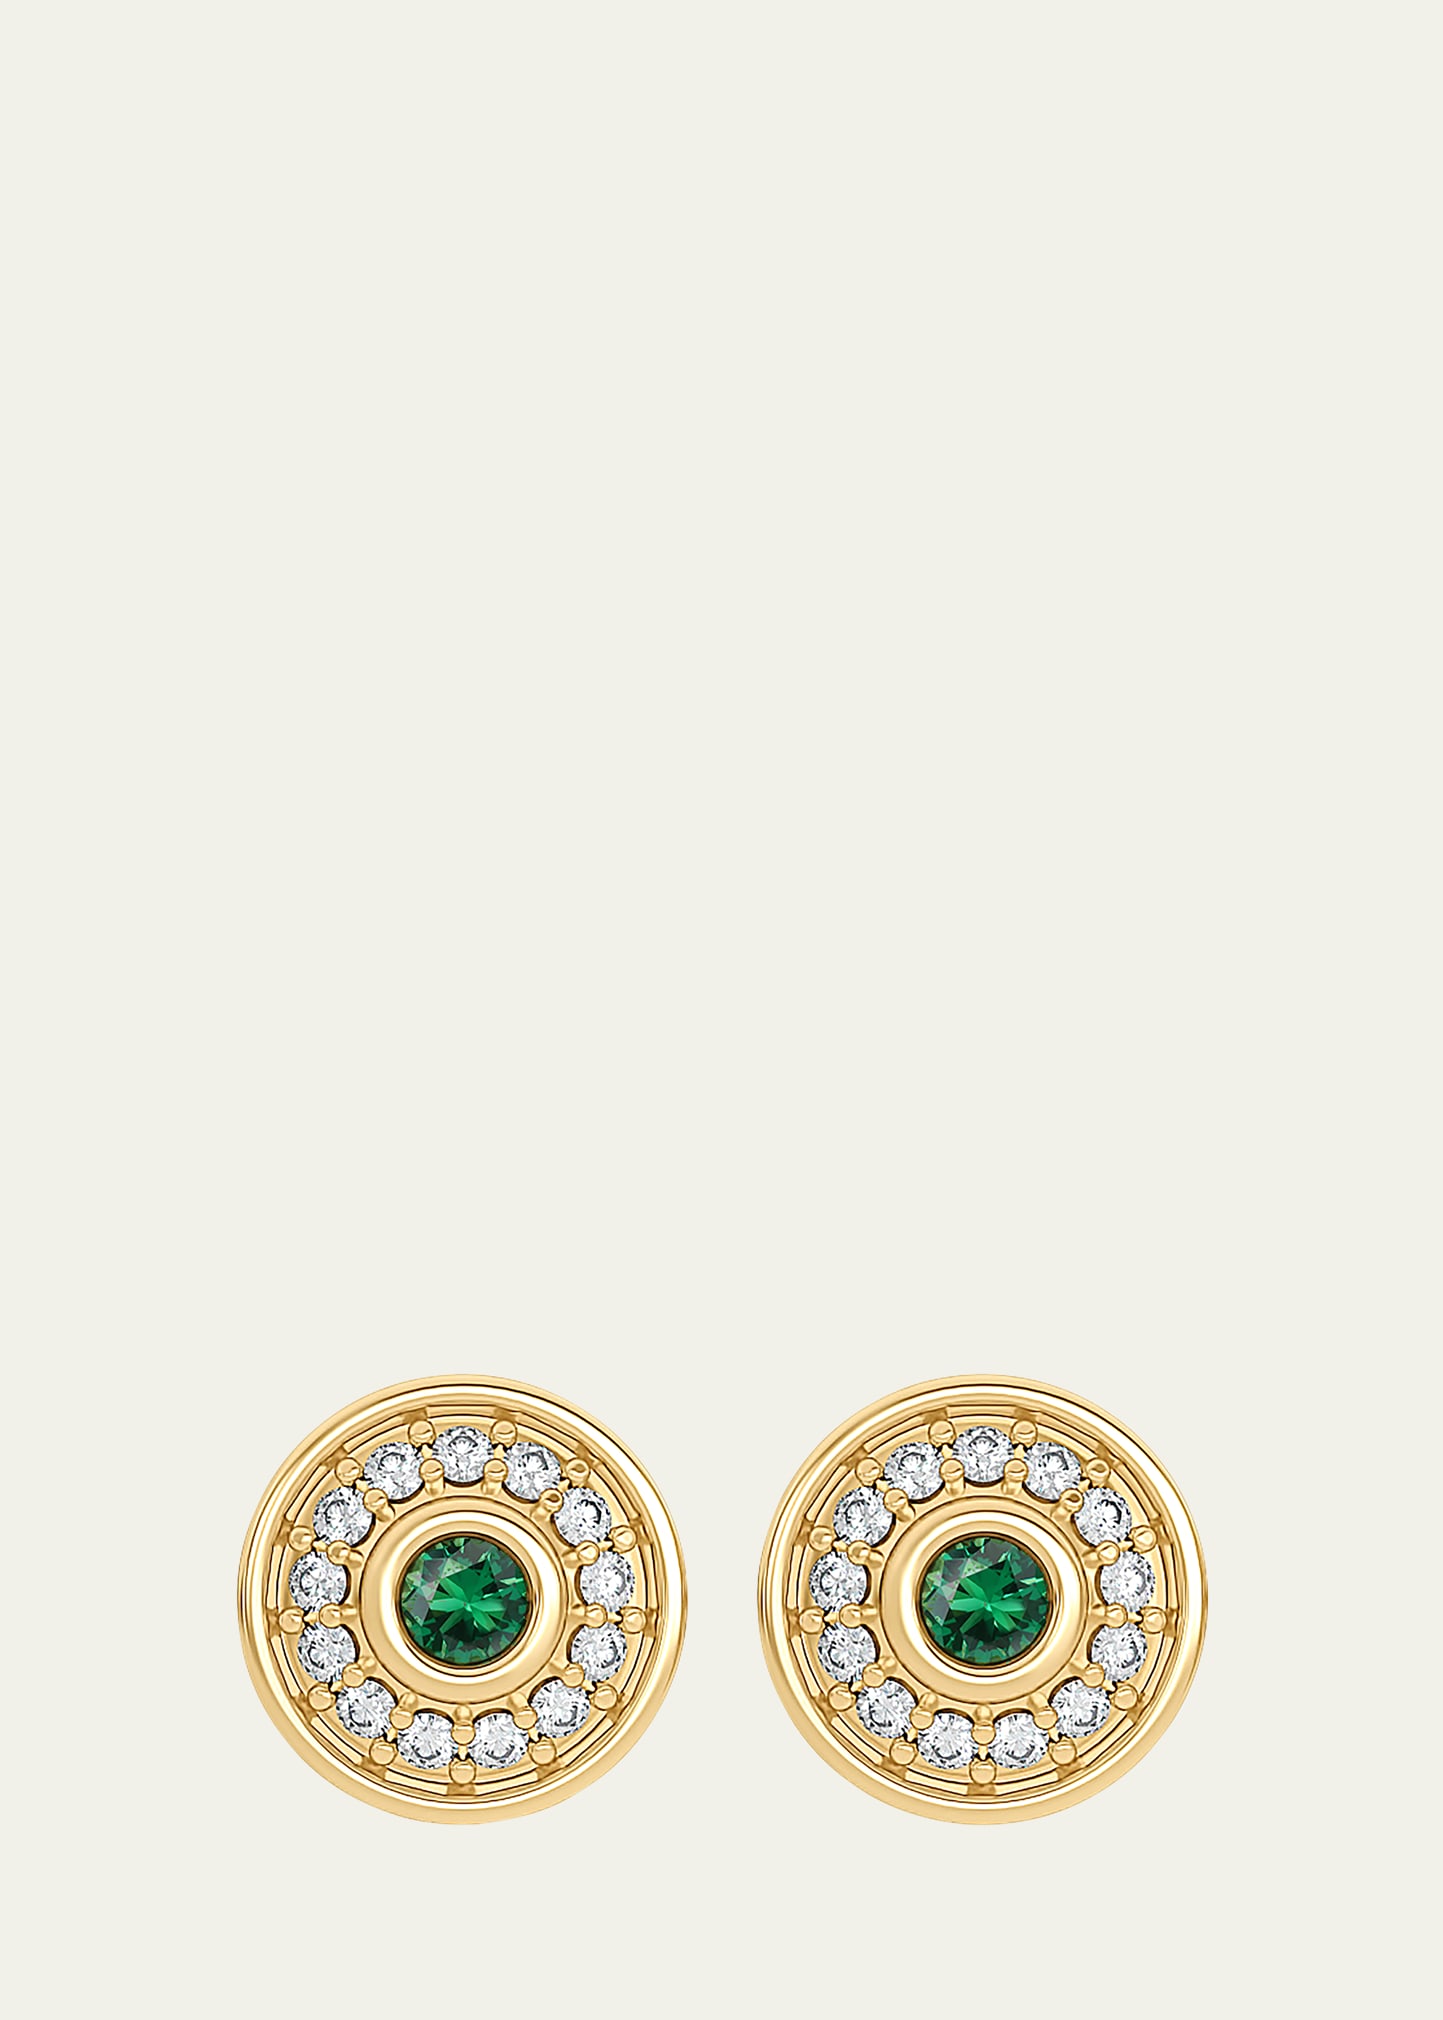 Almasika 18k Yellow Gold Universum Petite Pave Stud Earrings With Emeralds And Diamonds In Yg